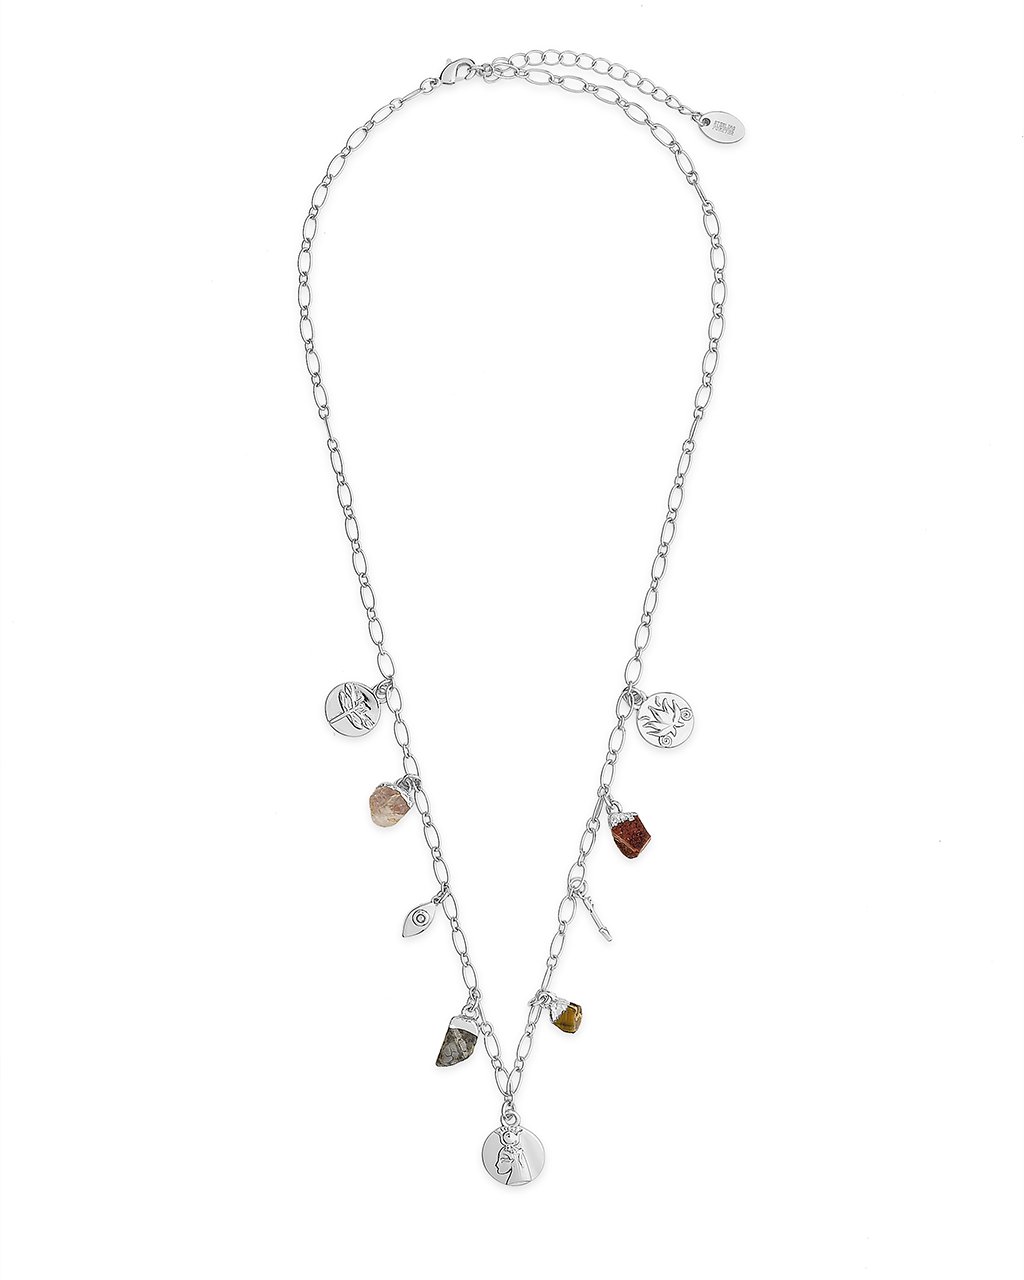 Multi Charm Chain Necklace Necklace Sterling Forever